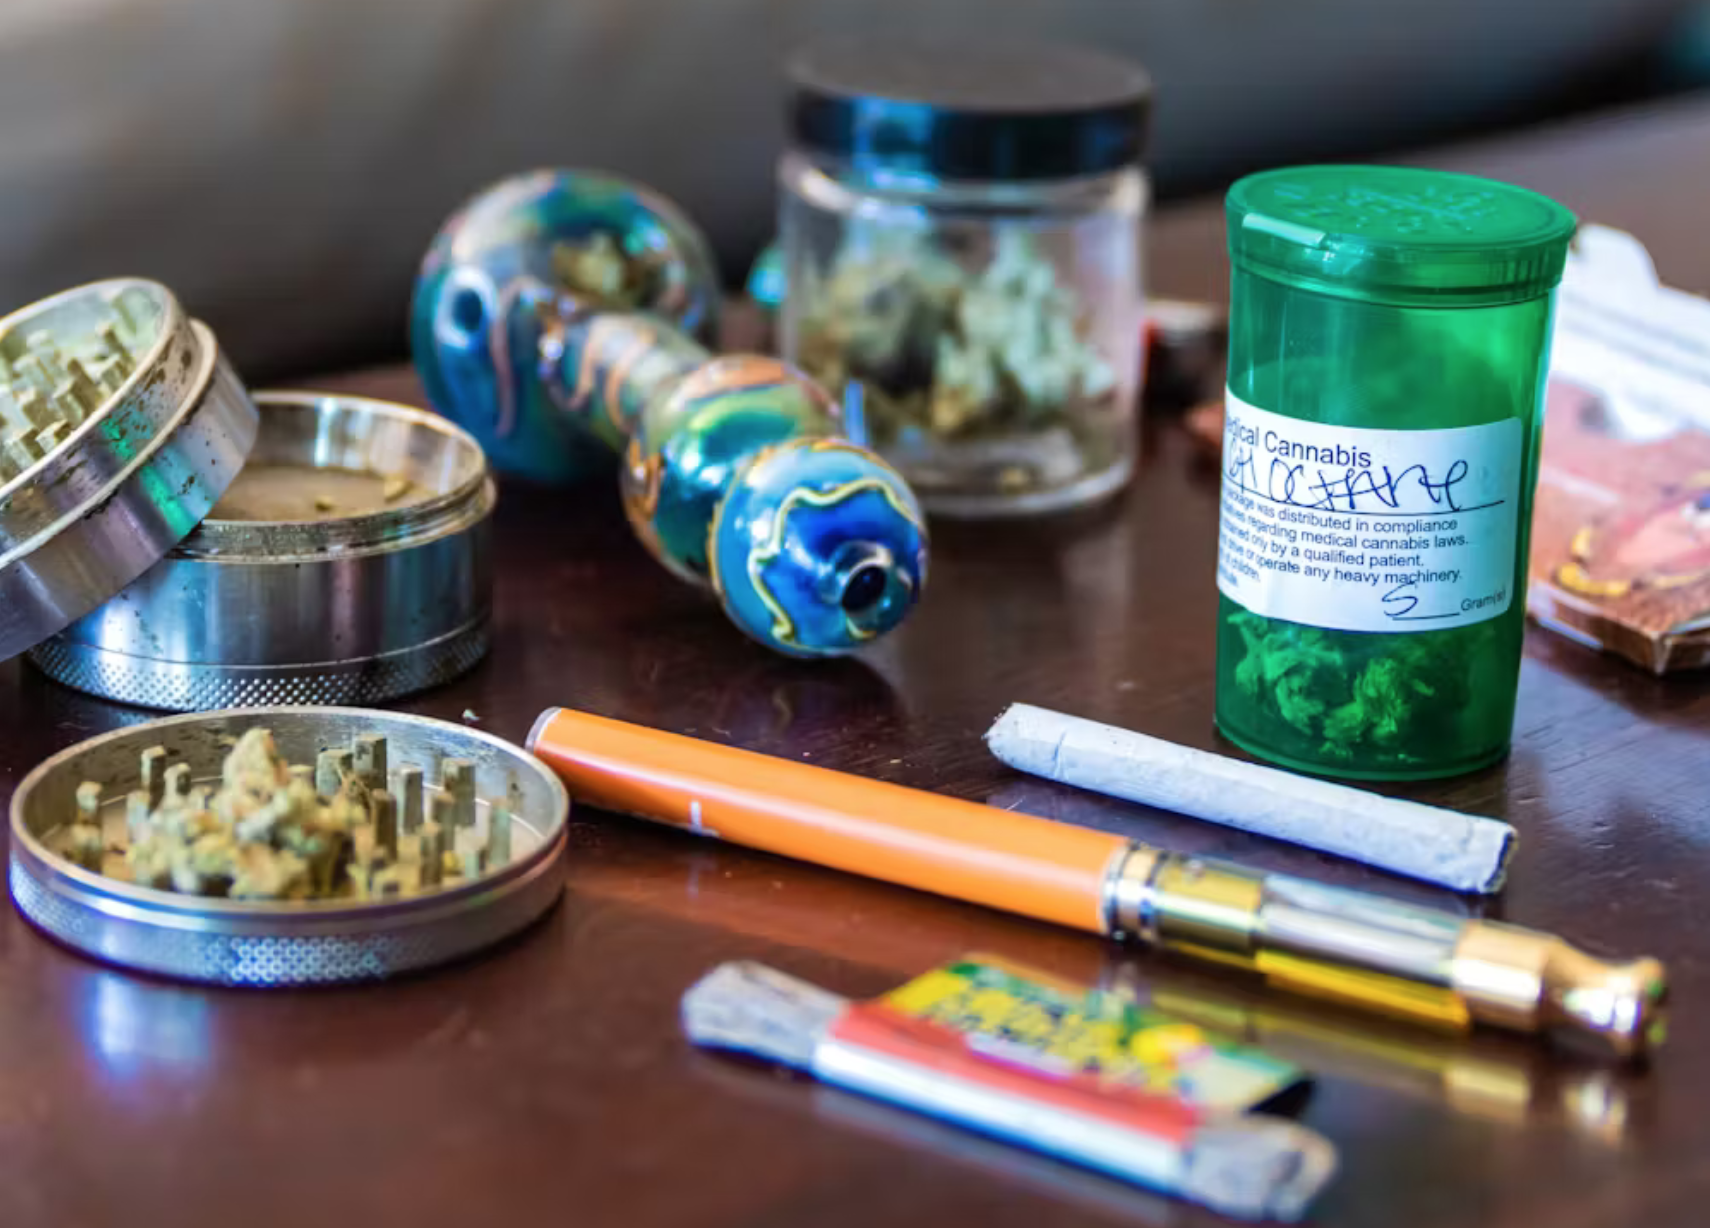  A selection of cannabis accessories, including a dab pen in the foreground. 